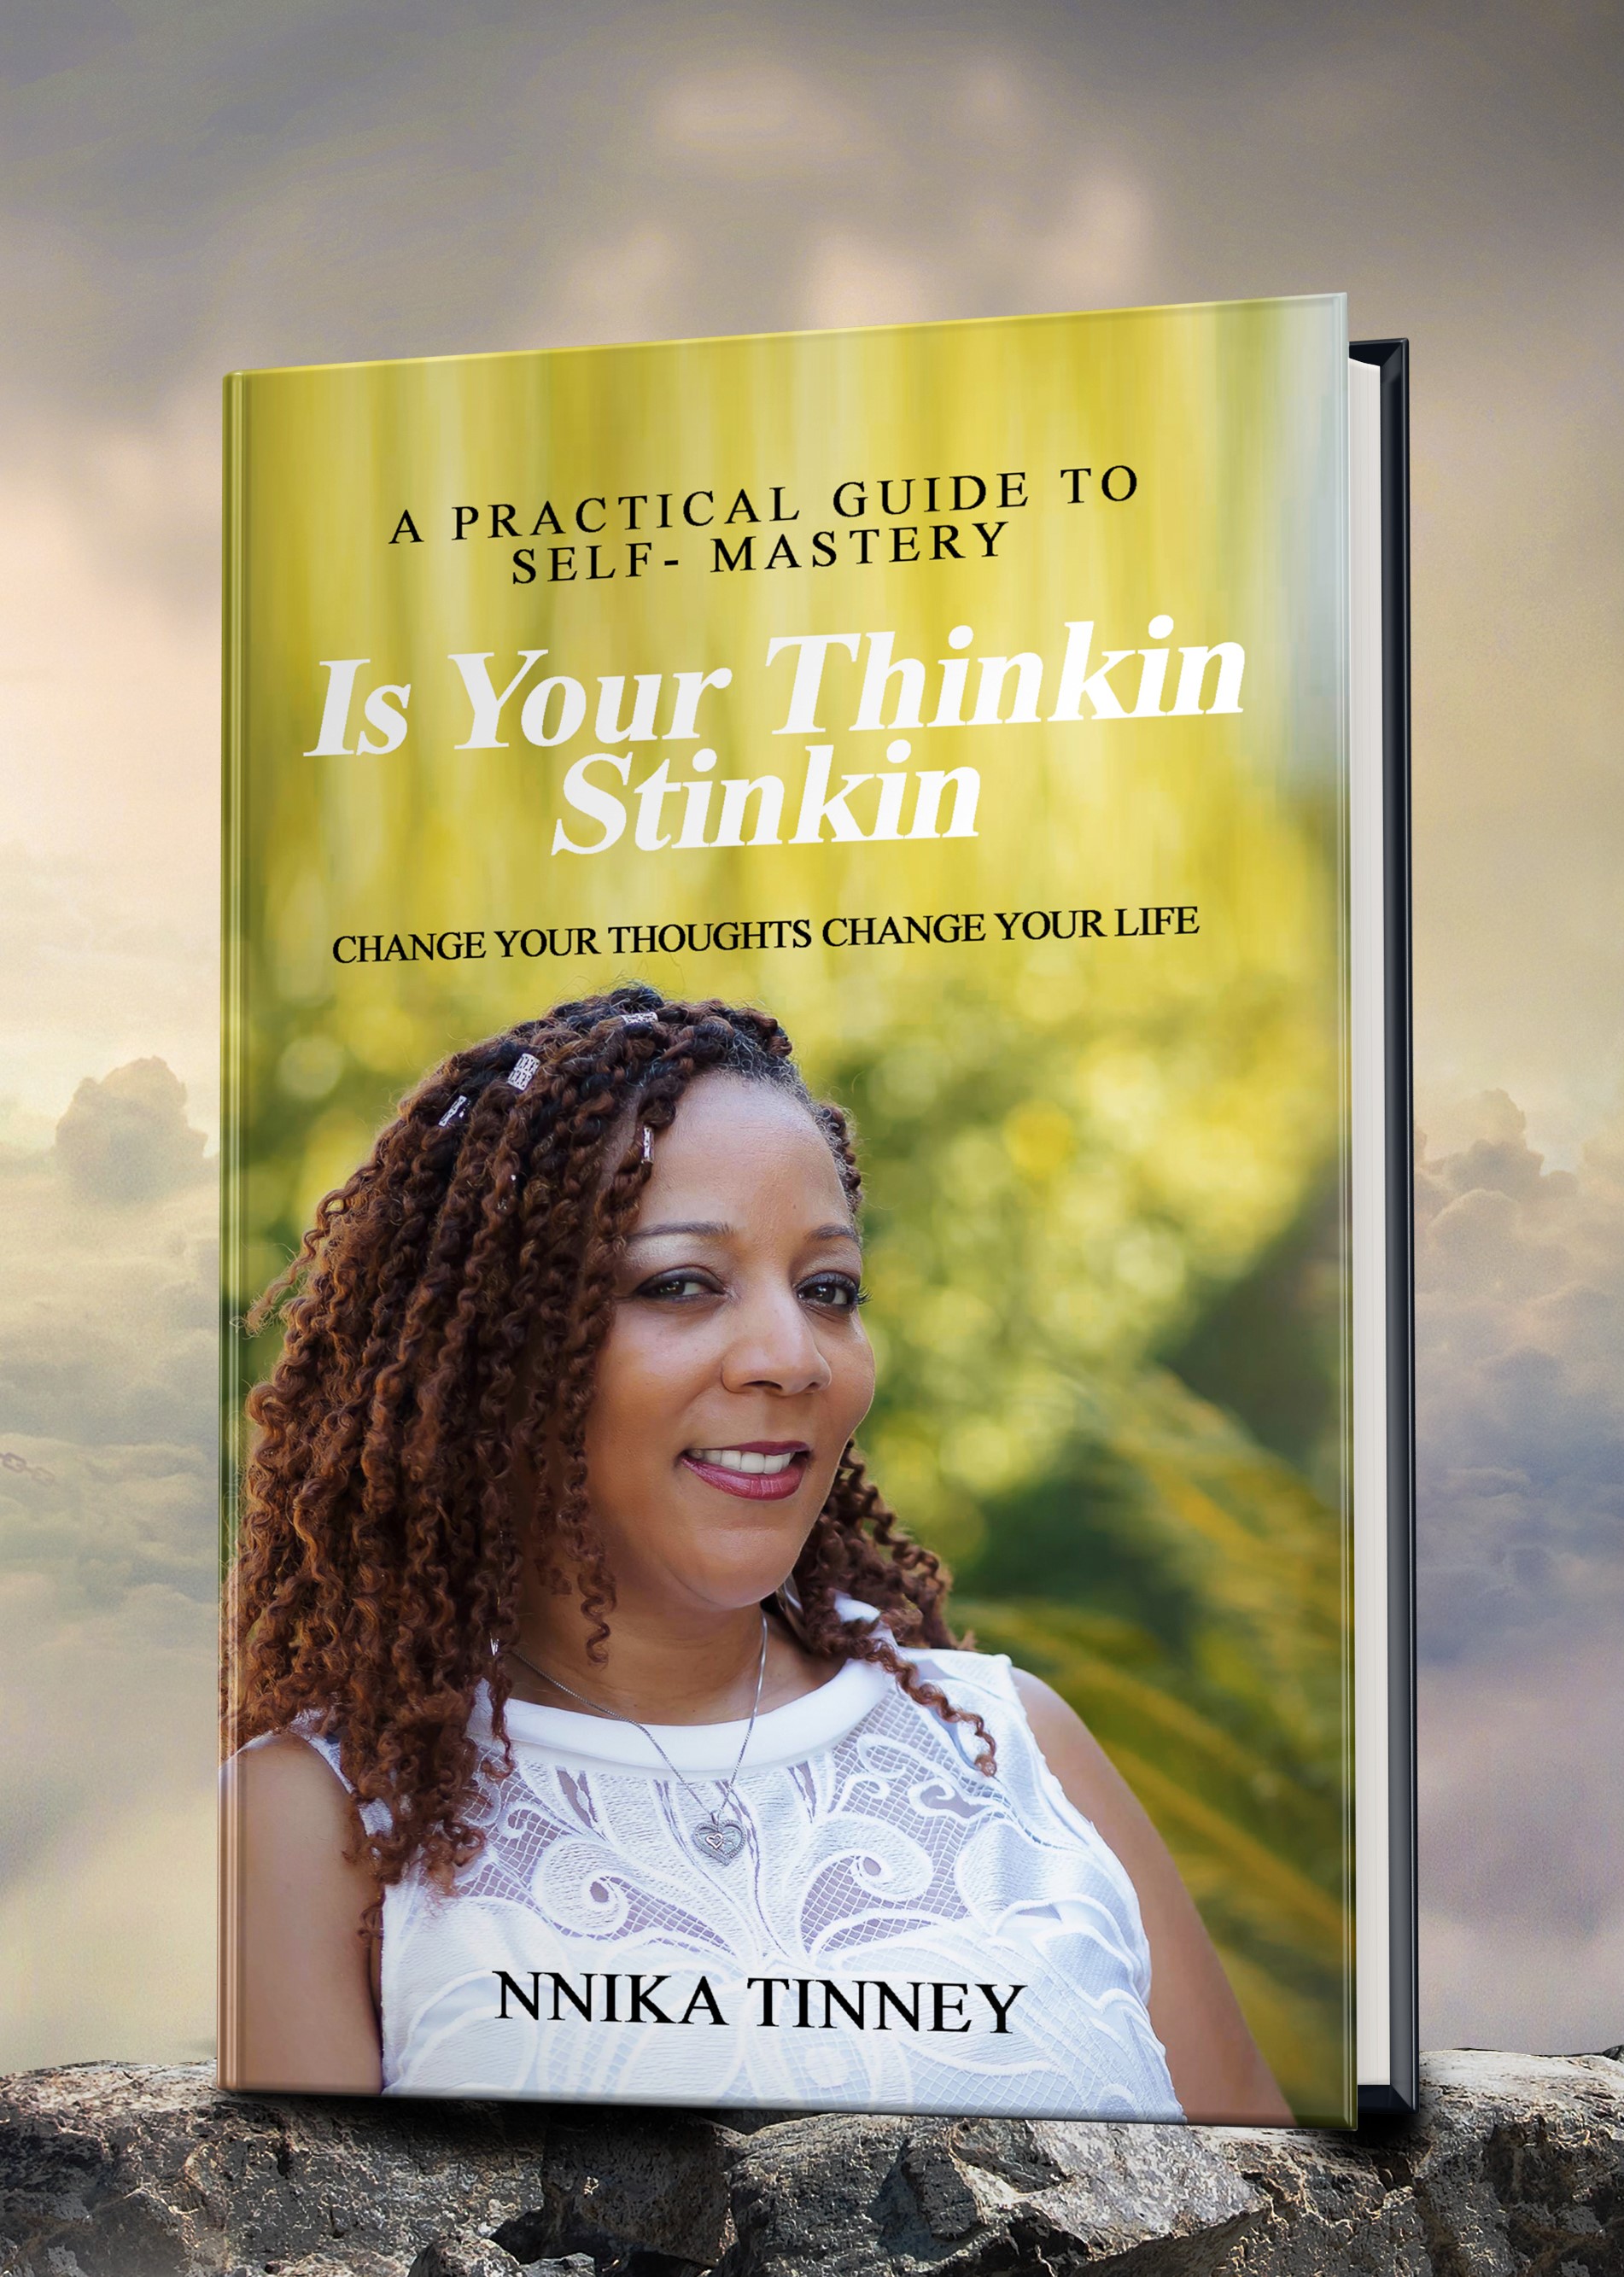 Nnika Tinney launches her new Practical Guide to Self-Mastery self-help book titled: "Is Your Thinkin Stinkin: Change Your Thoughts Change Your Life"